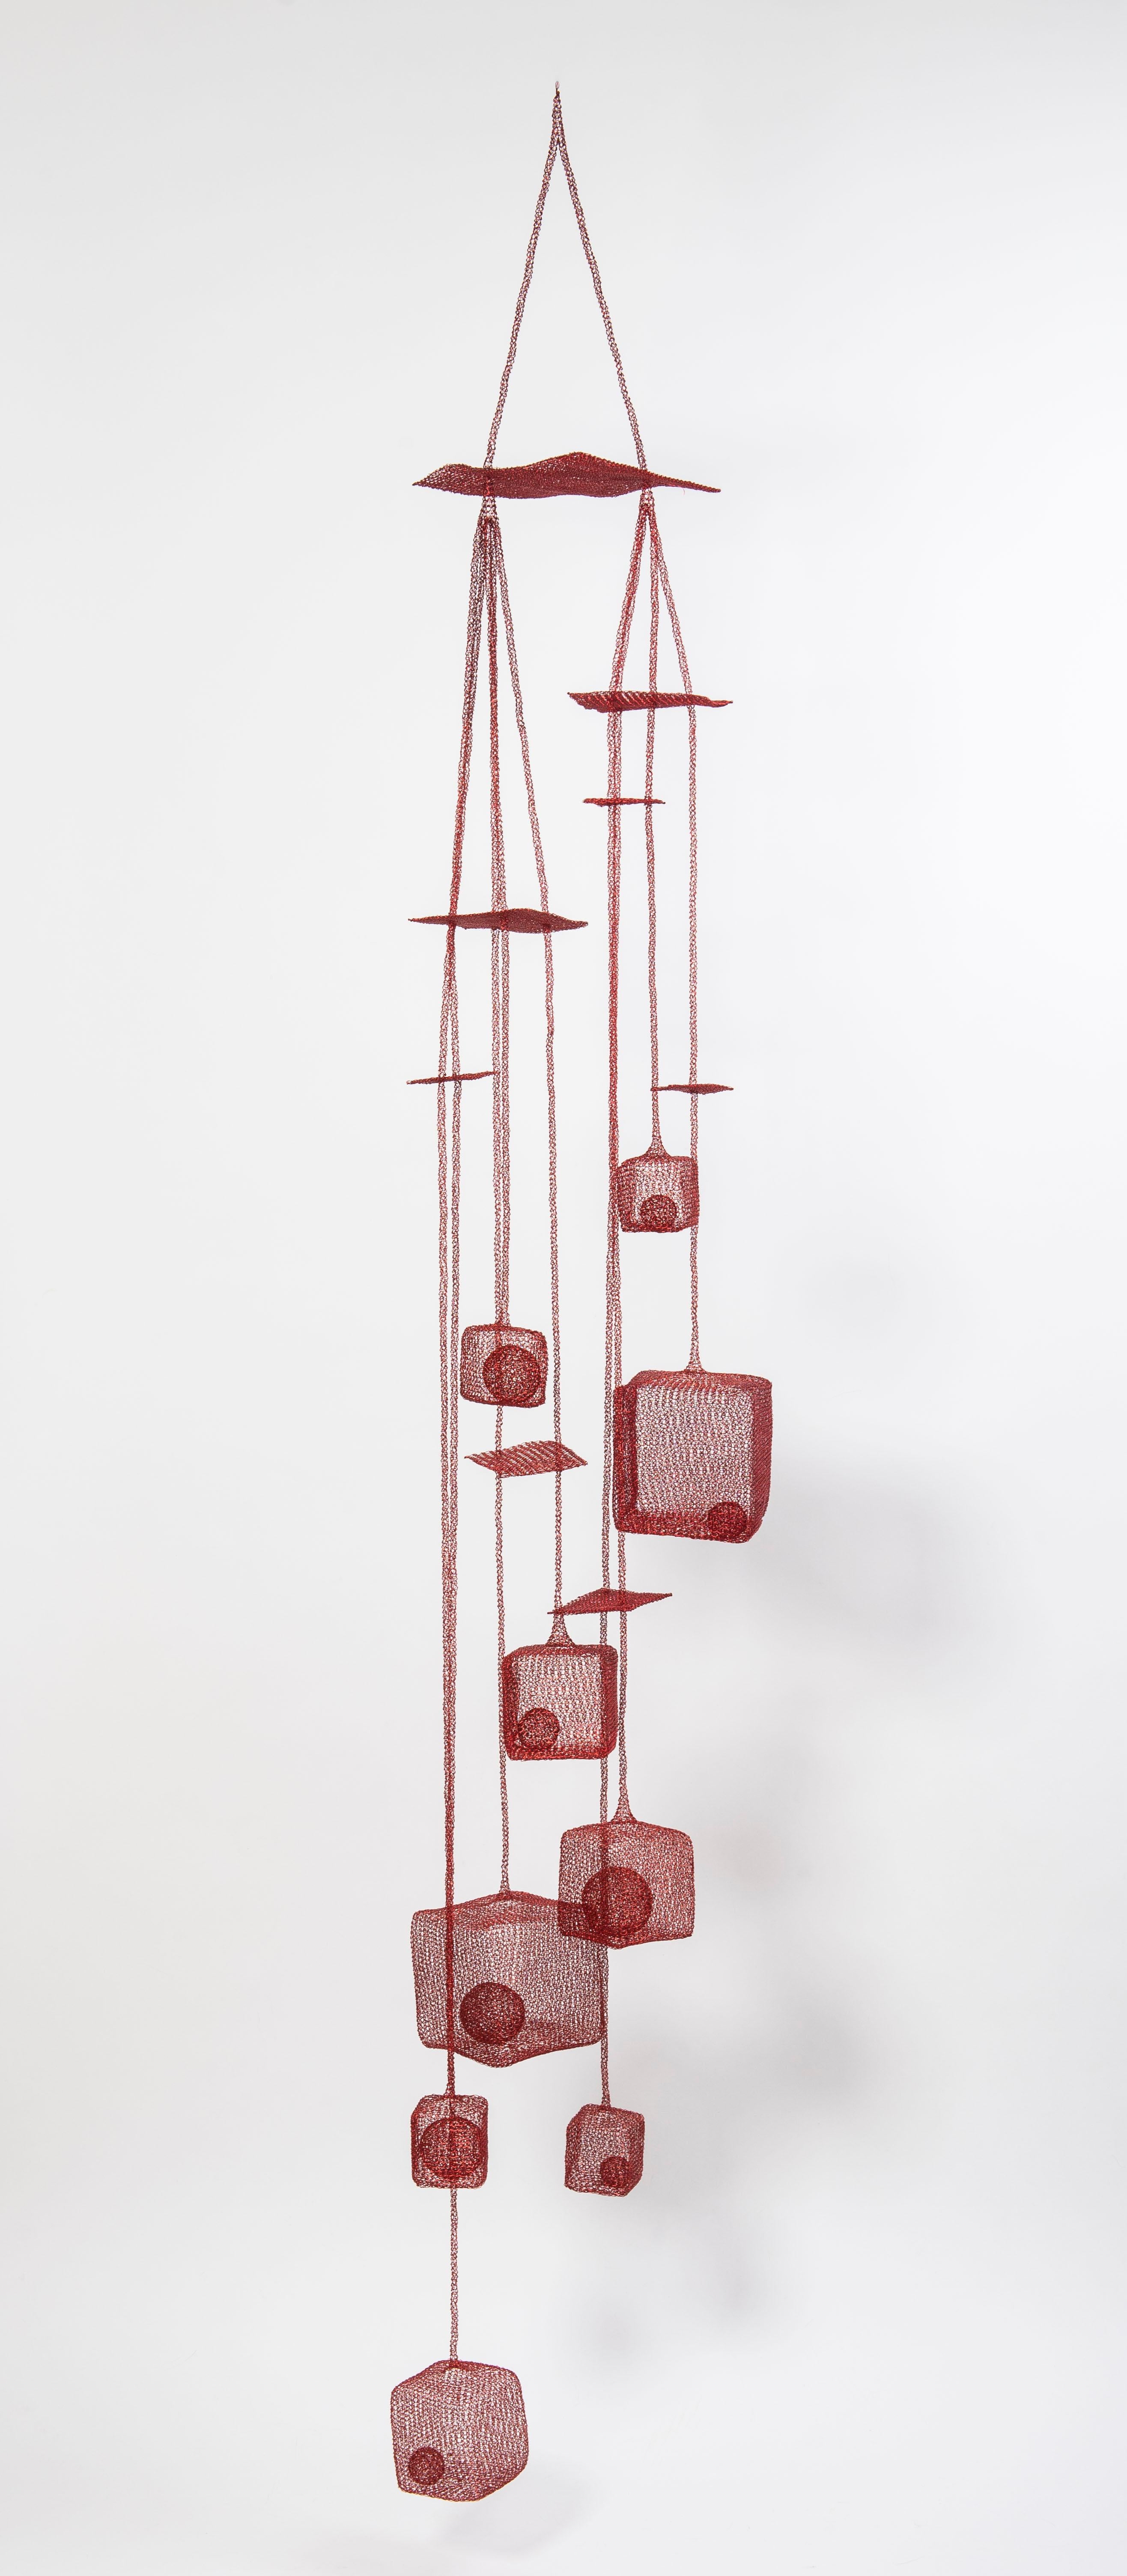 Delphine Grandvaux Abstract Sculpture - "Tokyo", Airy Woven Red Metal Hand-Made Pendant Tall Sculpture